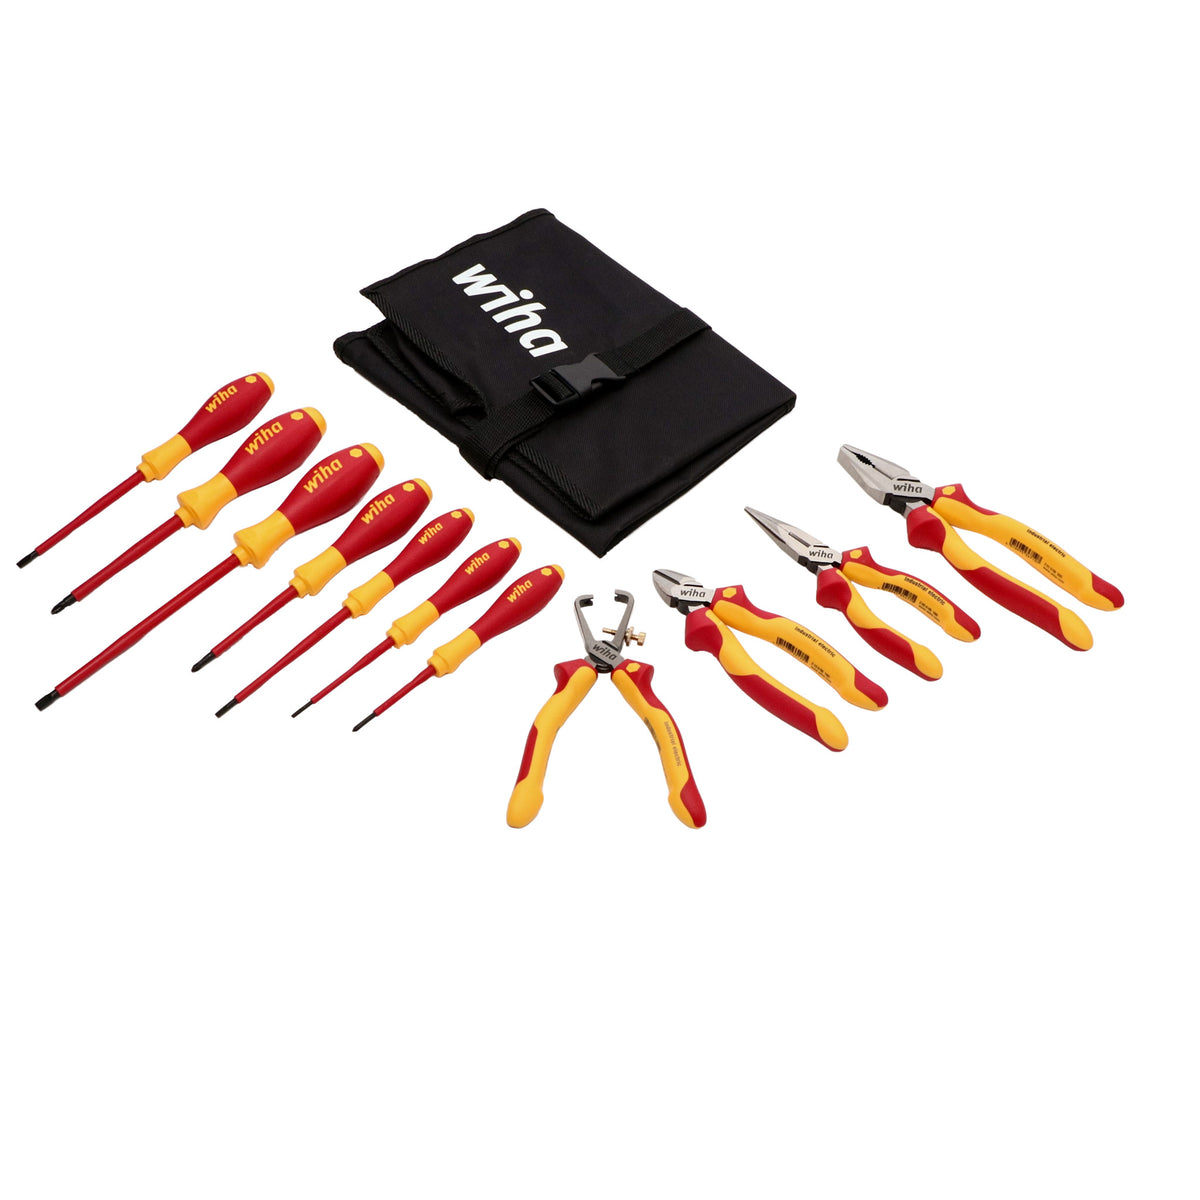 Wiha 32891 Insulated Pliers/Cutters & Drivers Set